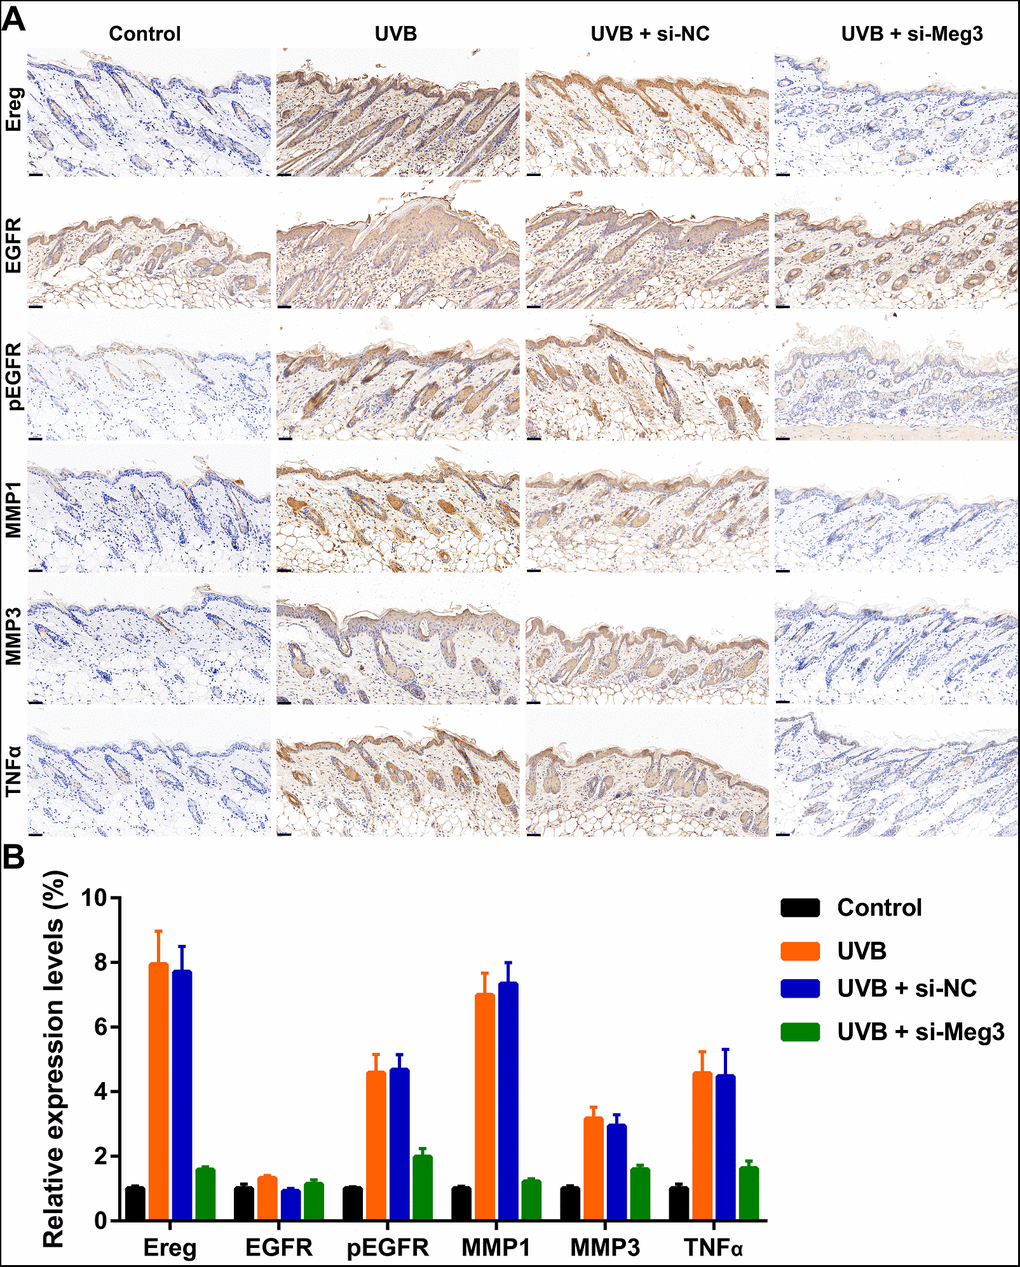 (A) Immunohistochemical staining for Ereg, EGFR, pEGFR, MMP1, MMP3 and TNFα in skin samples (scale bar = 50 μm). (B) The quantification analysis of relative expression levels.